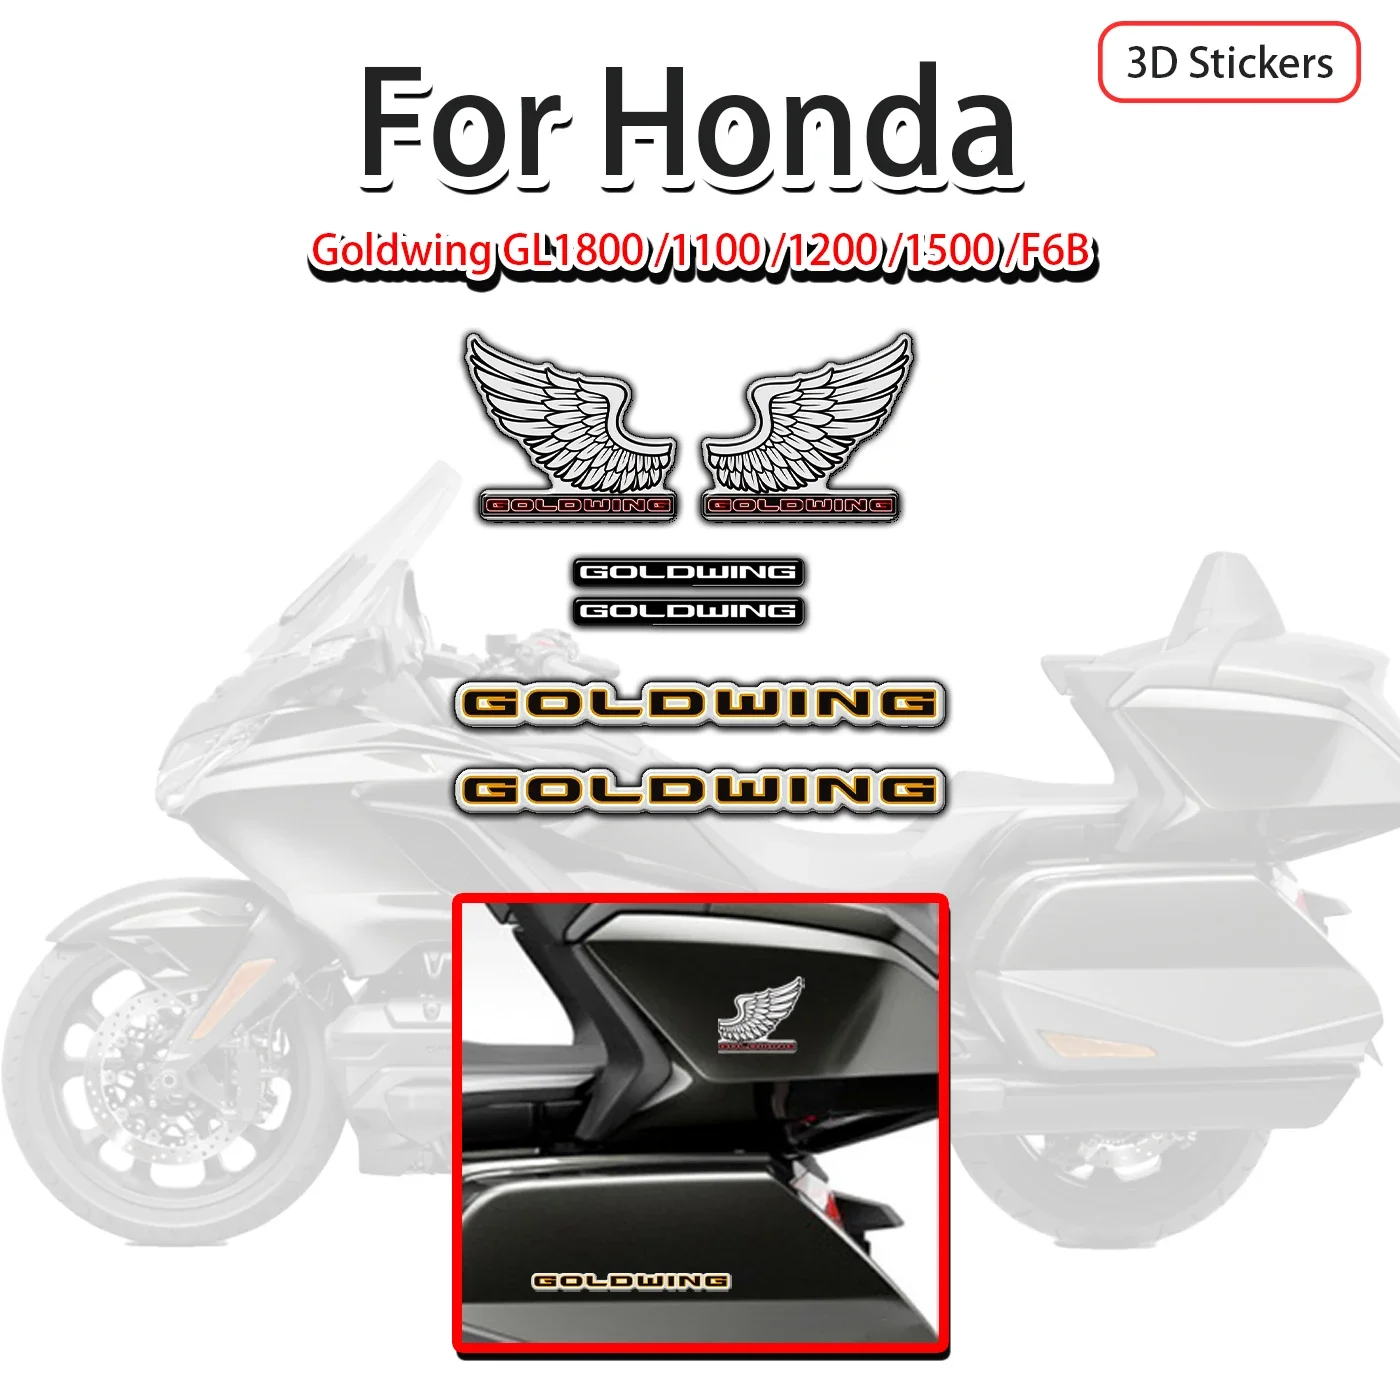 Motorcycle Decals For Honda Goldwing GL1800 1100 1200 1500 Tour F6B Cover Emblem Side Fairing Stickers Decal Logo Symbol Mark motorcycle for honda goldwing gl1800 1100 1200 1500 tour f6b gl 1800 cover emblem side fairing stickers decal logo symbol mark